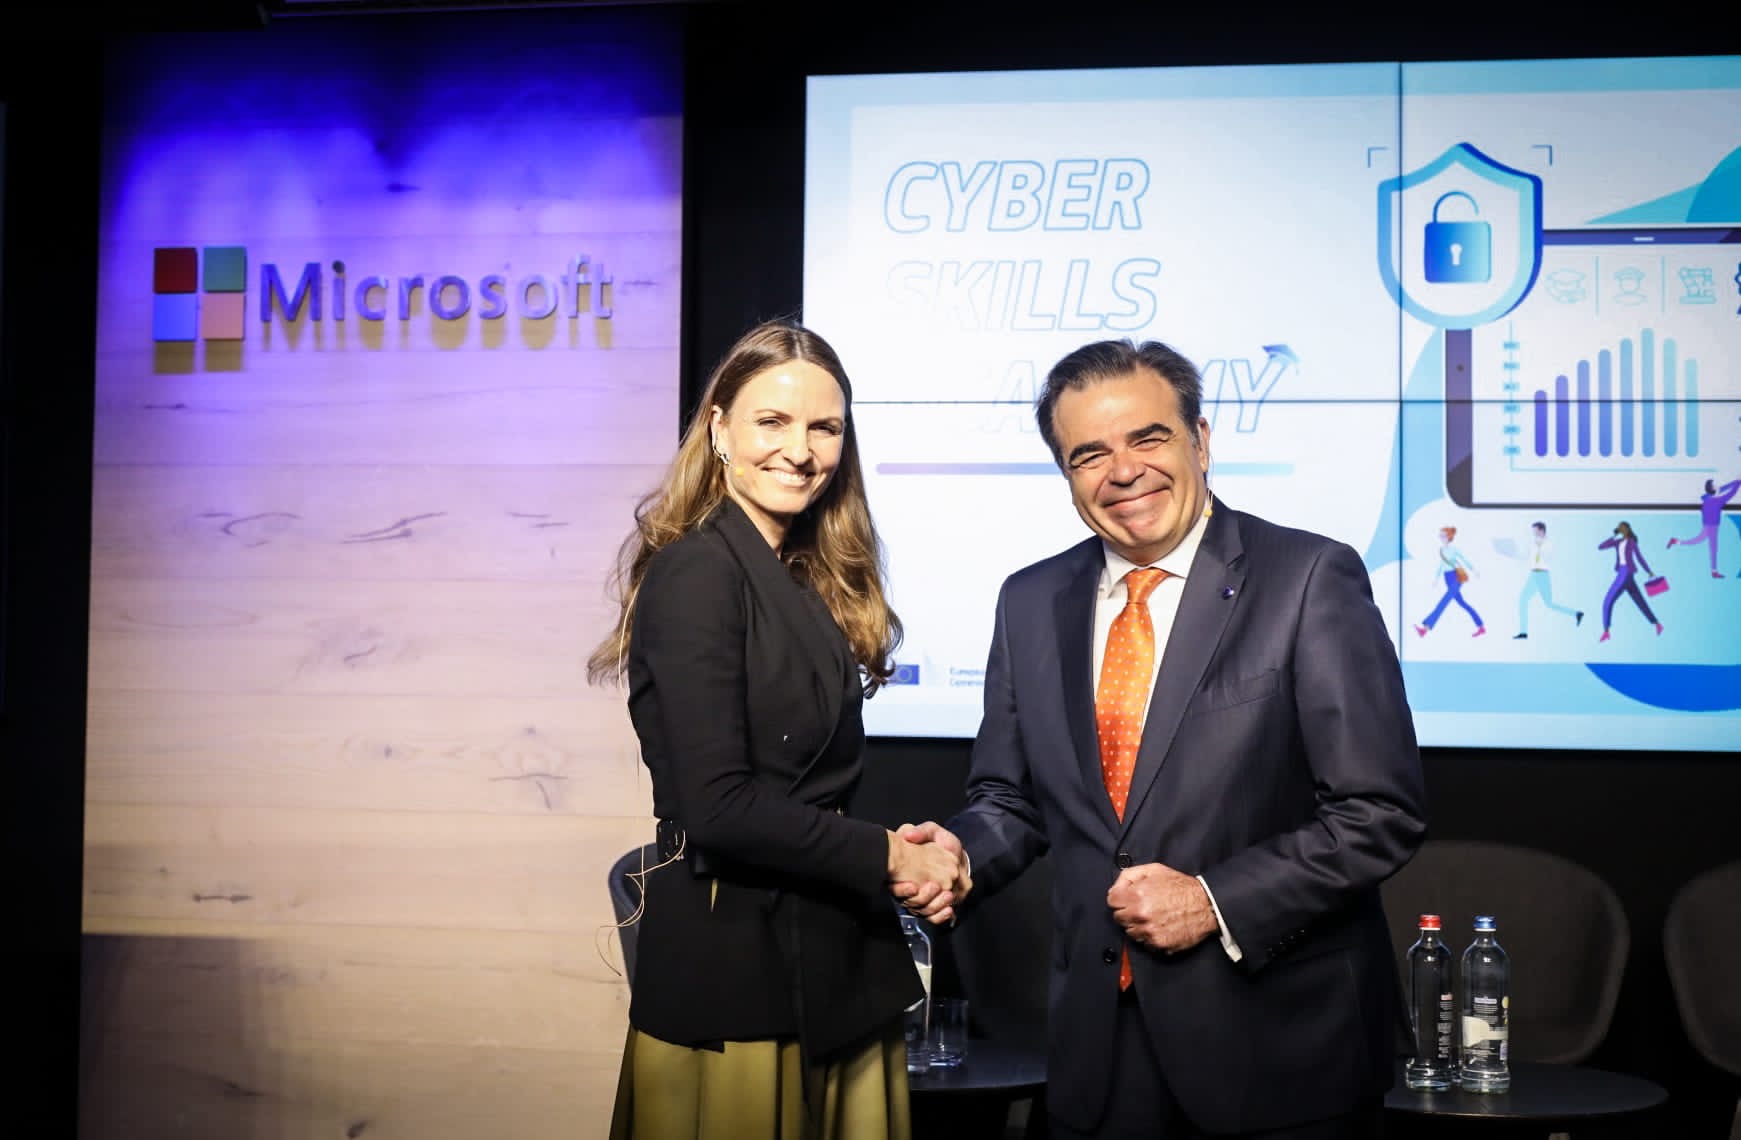 Photo of Vice President of the European Commission, Margaritis Schinas and Microsoft Vice President for European Government Affairs, Nanna-Louise Linde, at the European Cyber Agora conference in Brussels